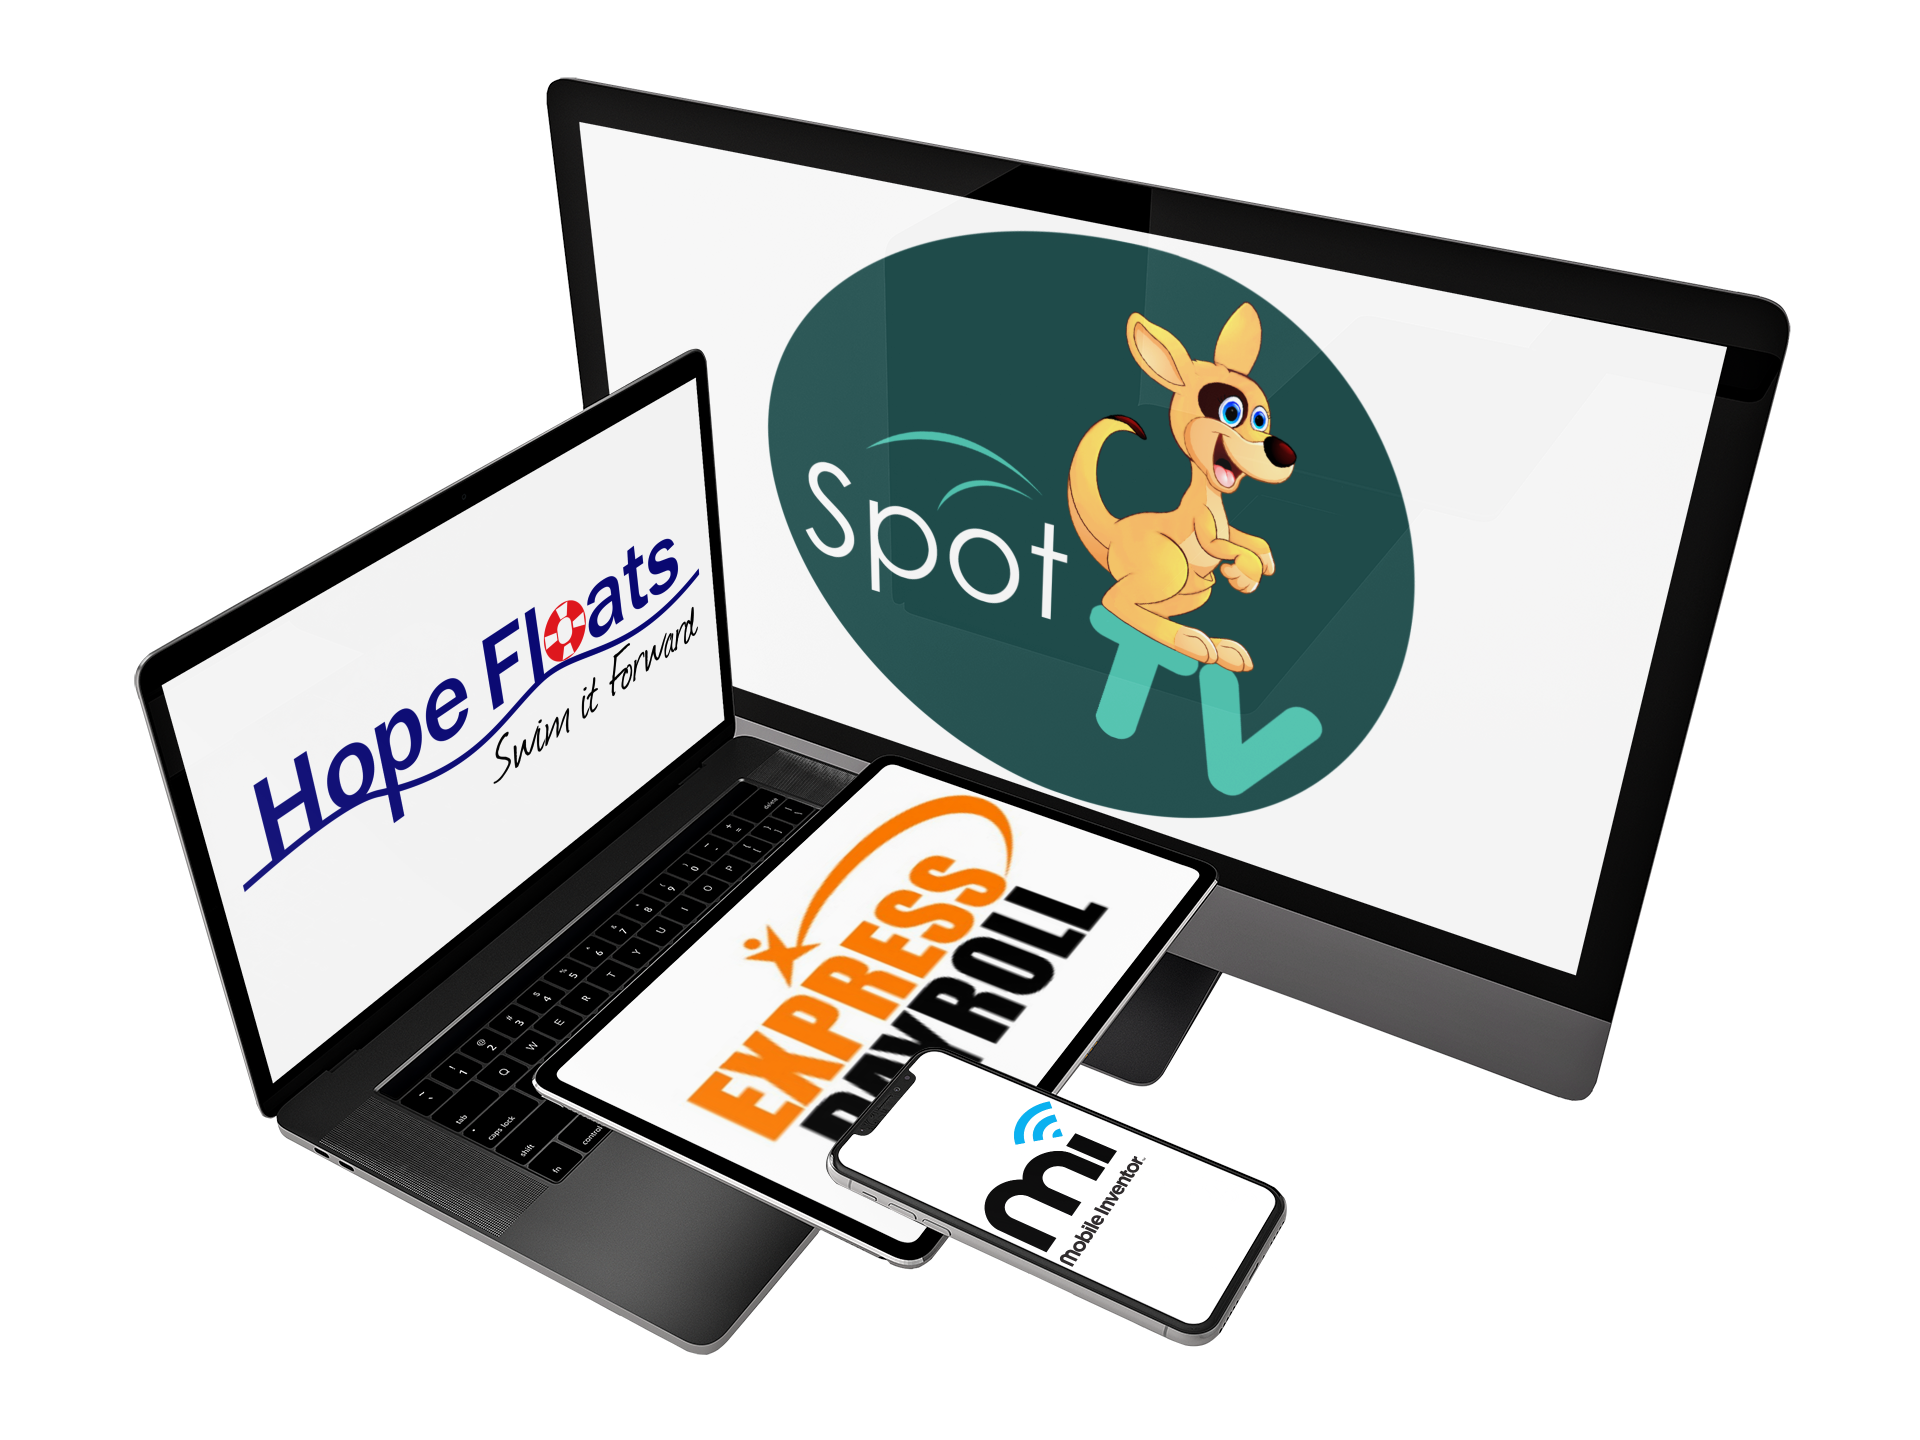 Jackrabbit integrations are available for live video streaming, charitable giving, payroll processing, ePayments, mobile apps and more!